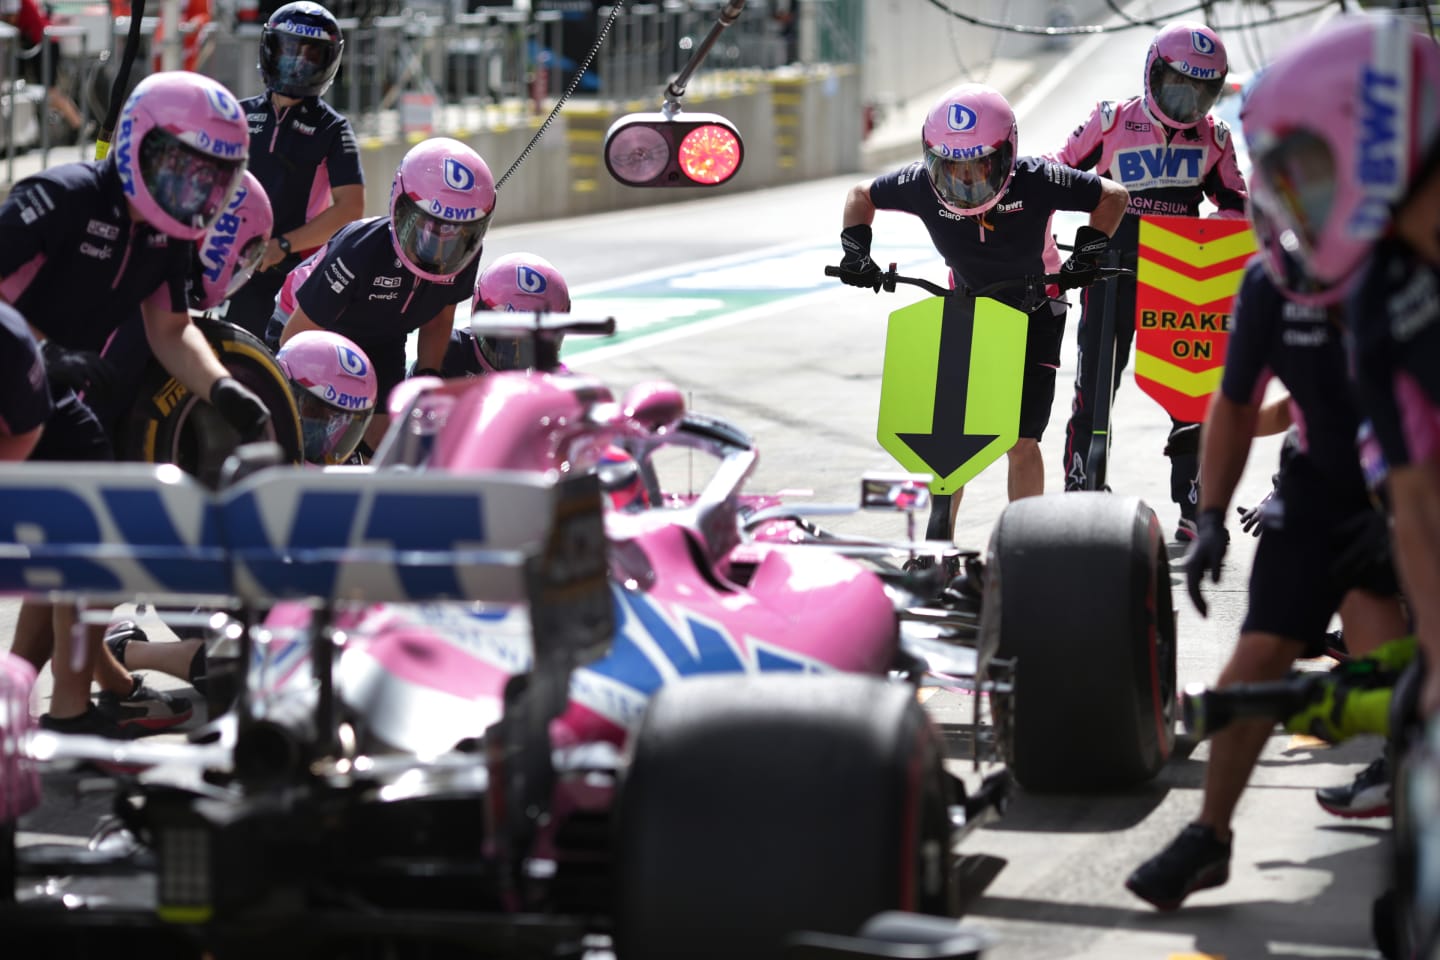 SPIELBERG, AUSTRIA - JULY 03: Racing Point team members prepare for a pit stop during practice for the F1 Grand Prix of Austria at Red Bull Ring on July 03, 2020 in Spielberg, Austria. (Photo by Peter Fox/Getty Images)